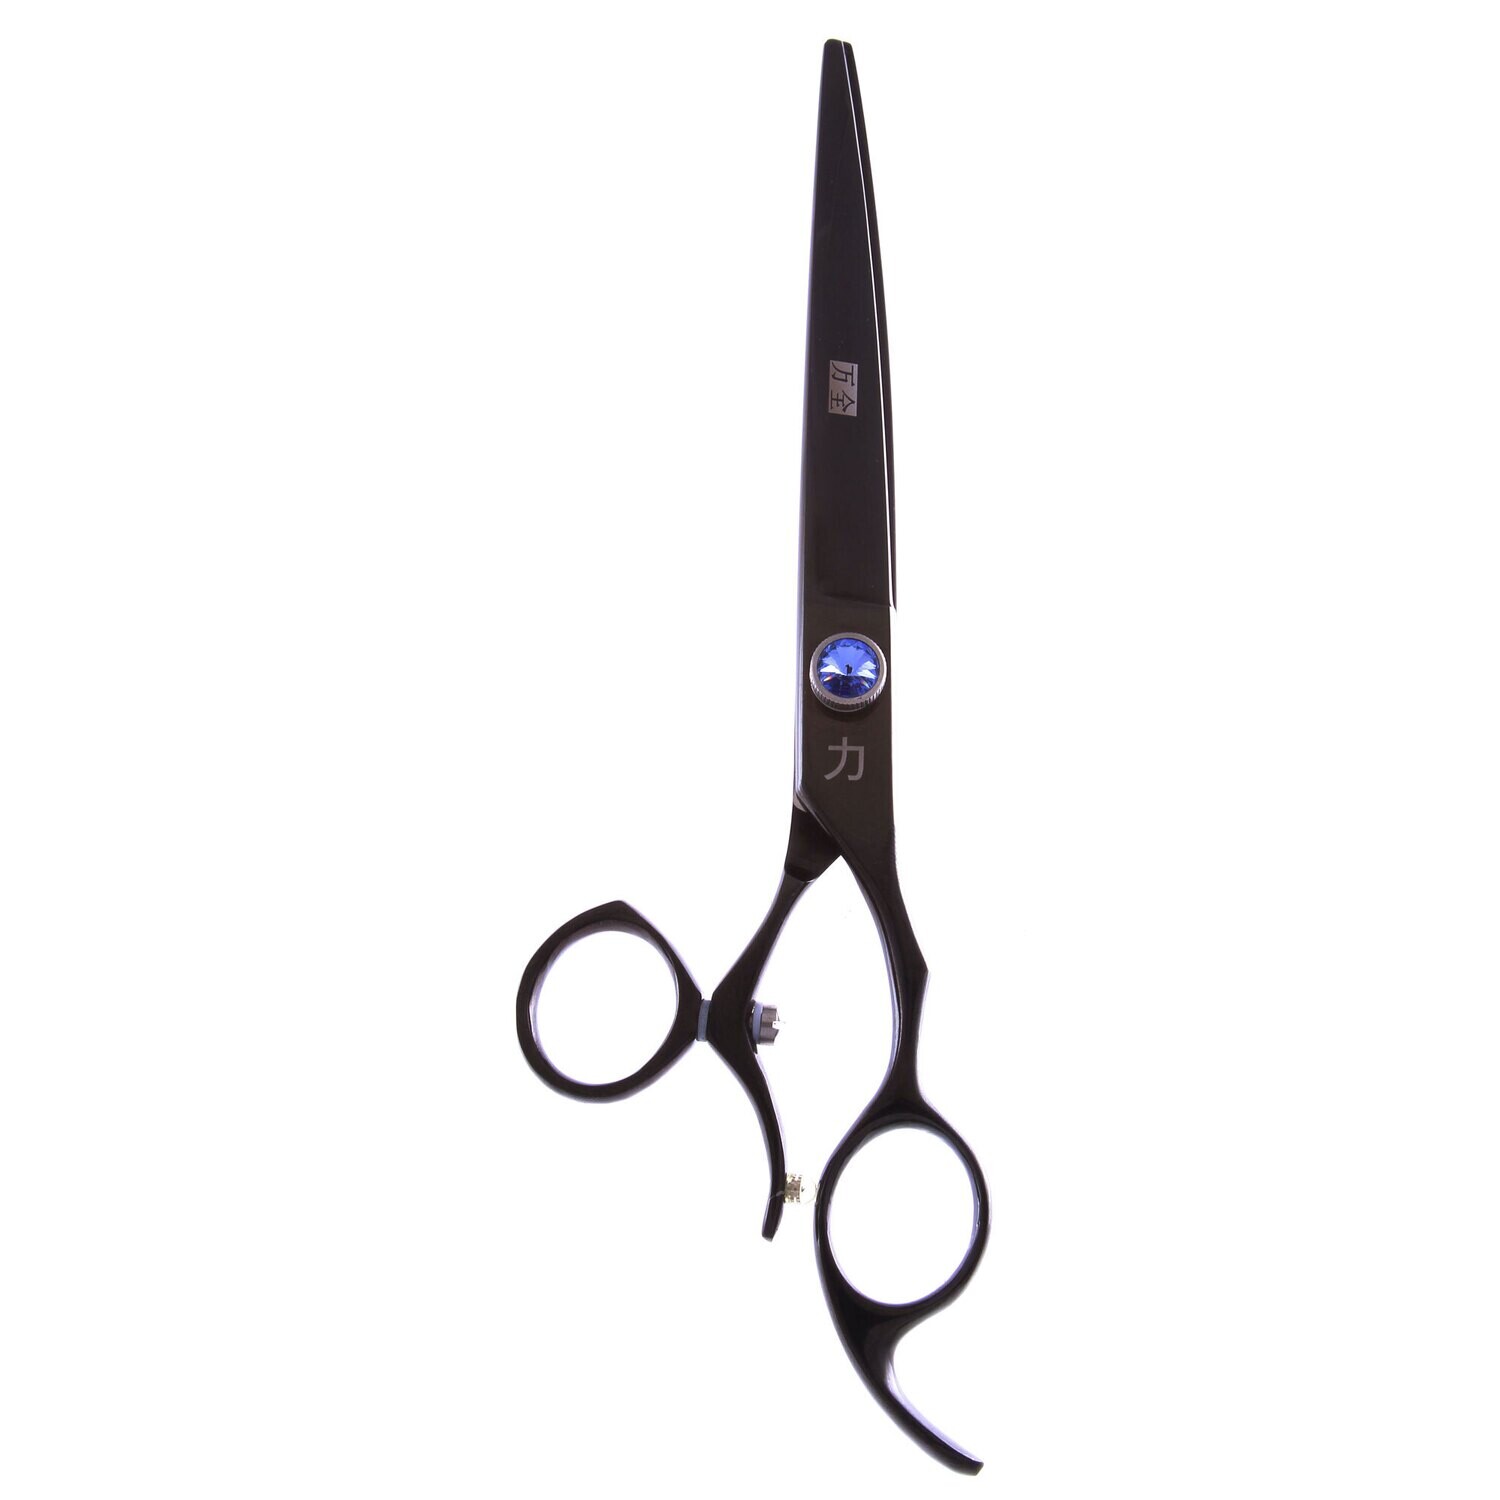 8.0-Inch Japanese 440C, 360° SWIVEL Professional Pet Grooming STRAIGHT Cutting Scissor with Delicate Black Screw